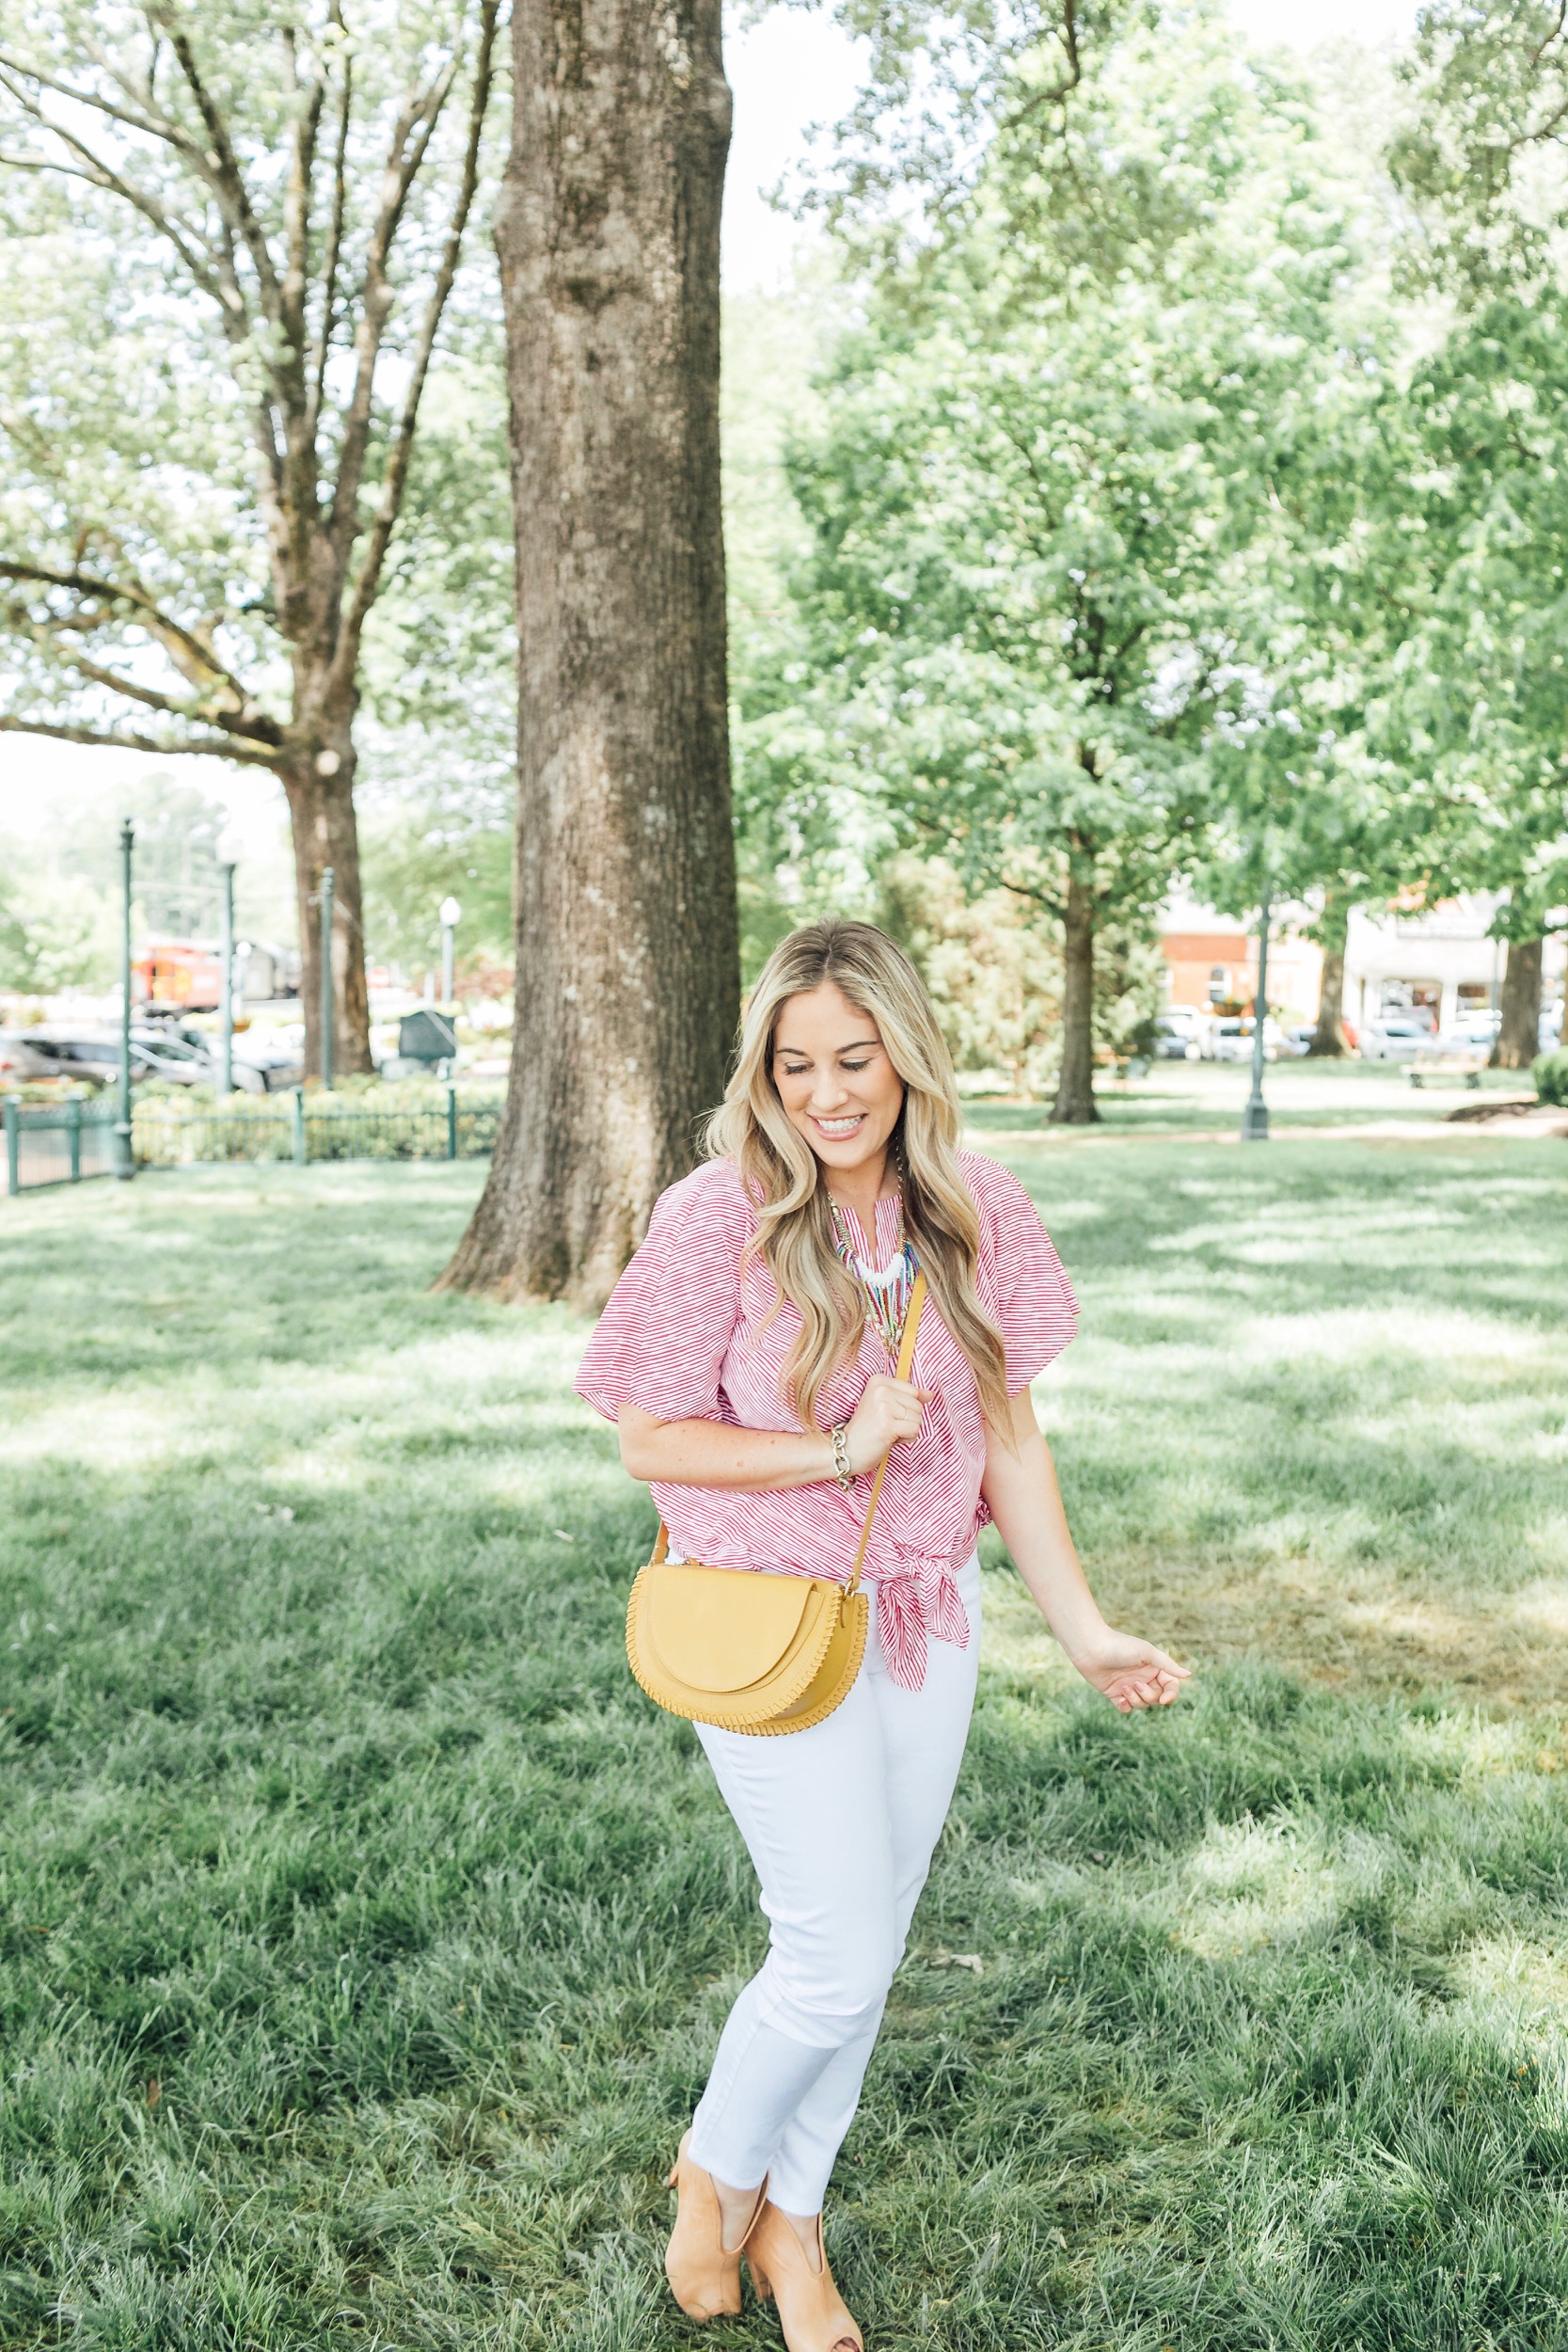 The 5 Most Flattering White Jeans for Summer featured by top US fashion blog, Walking in Memphis in High Heels: image of a woman wearing Chico’s no stain flattering white jeans, Chico’s striped sleeve top, Chico’s colorful bead necklace, and Vince Camuto shorties